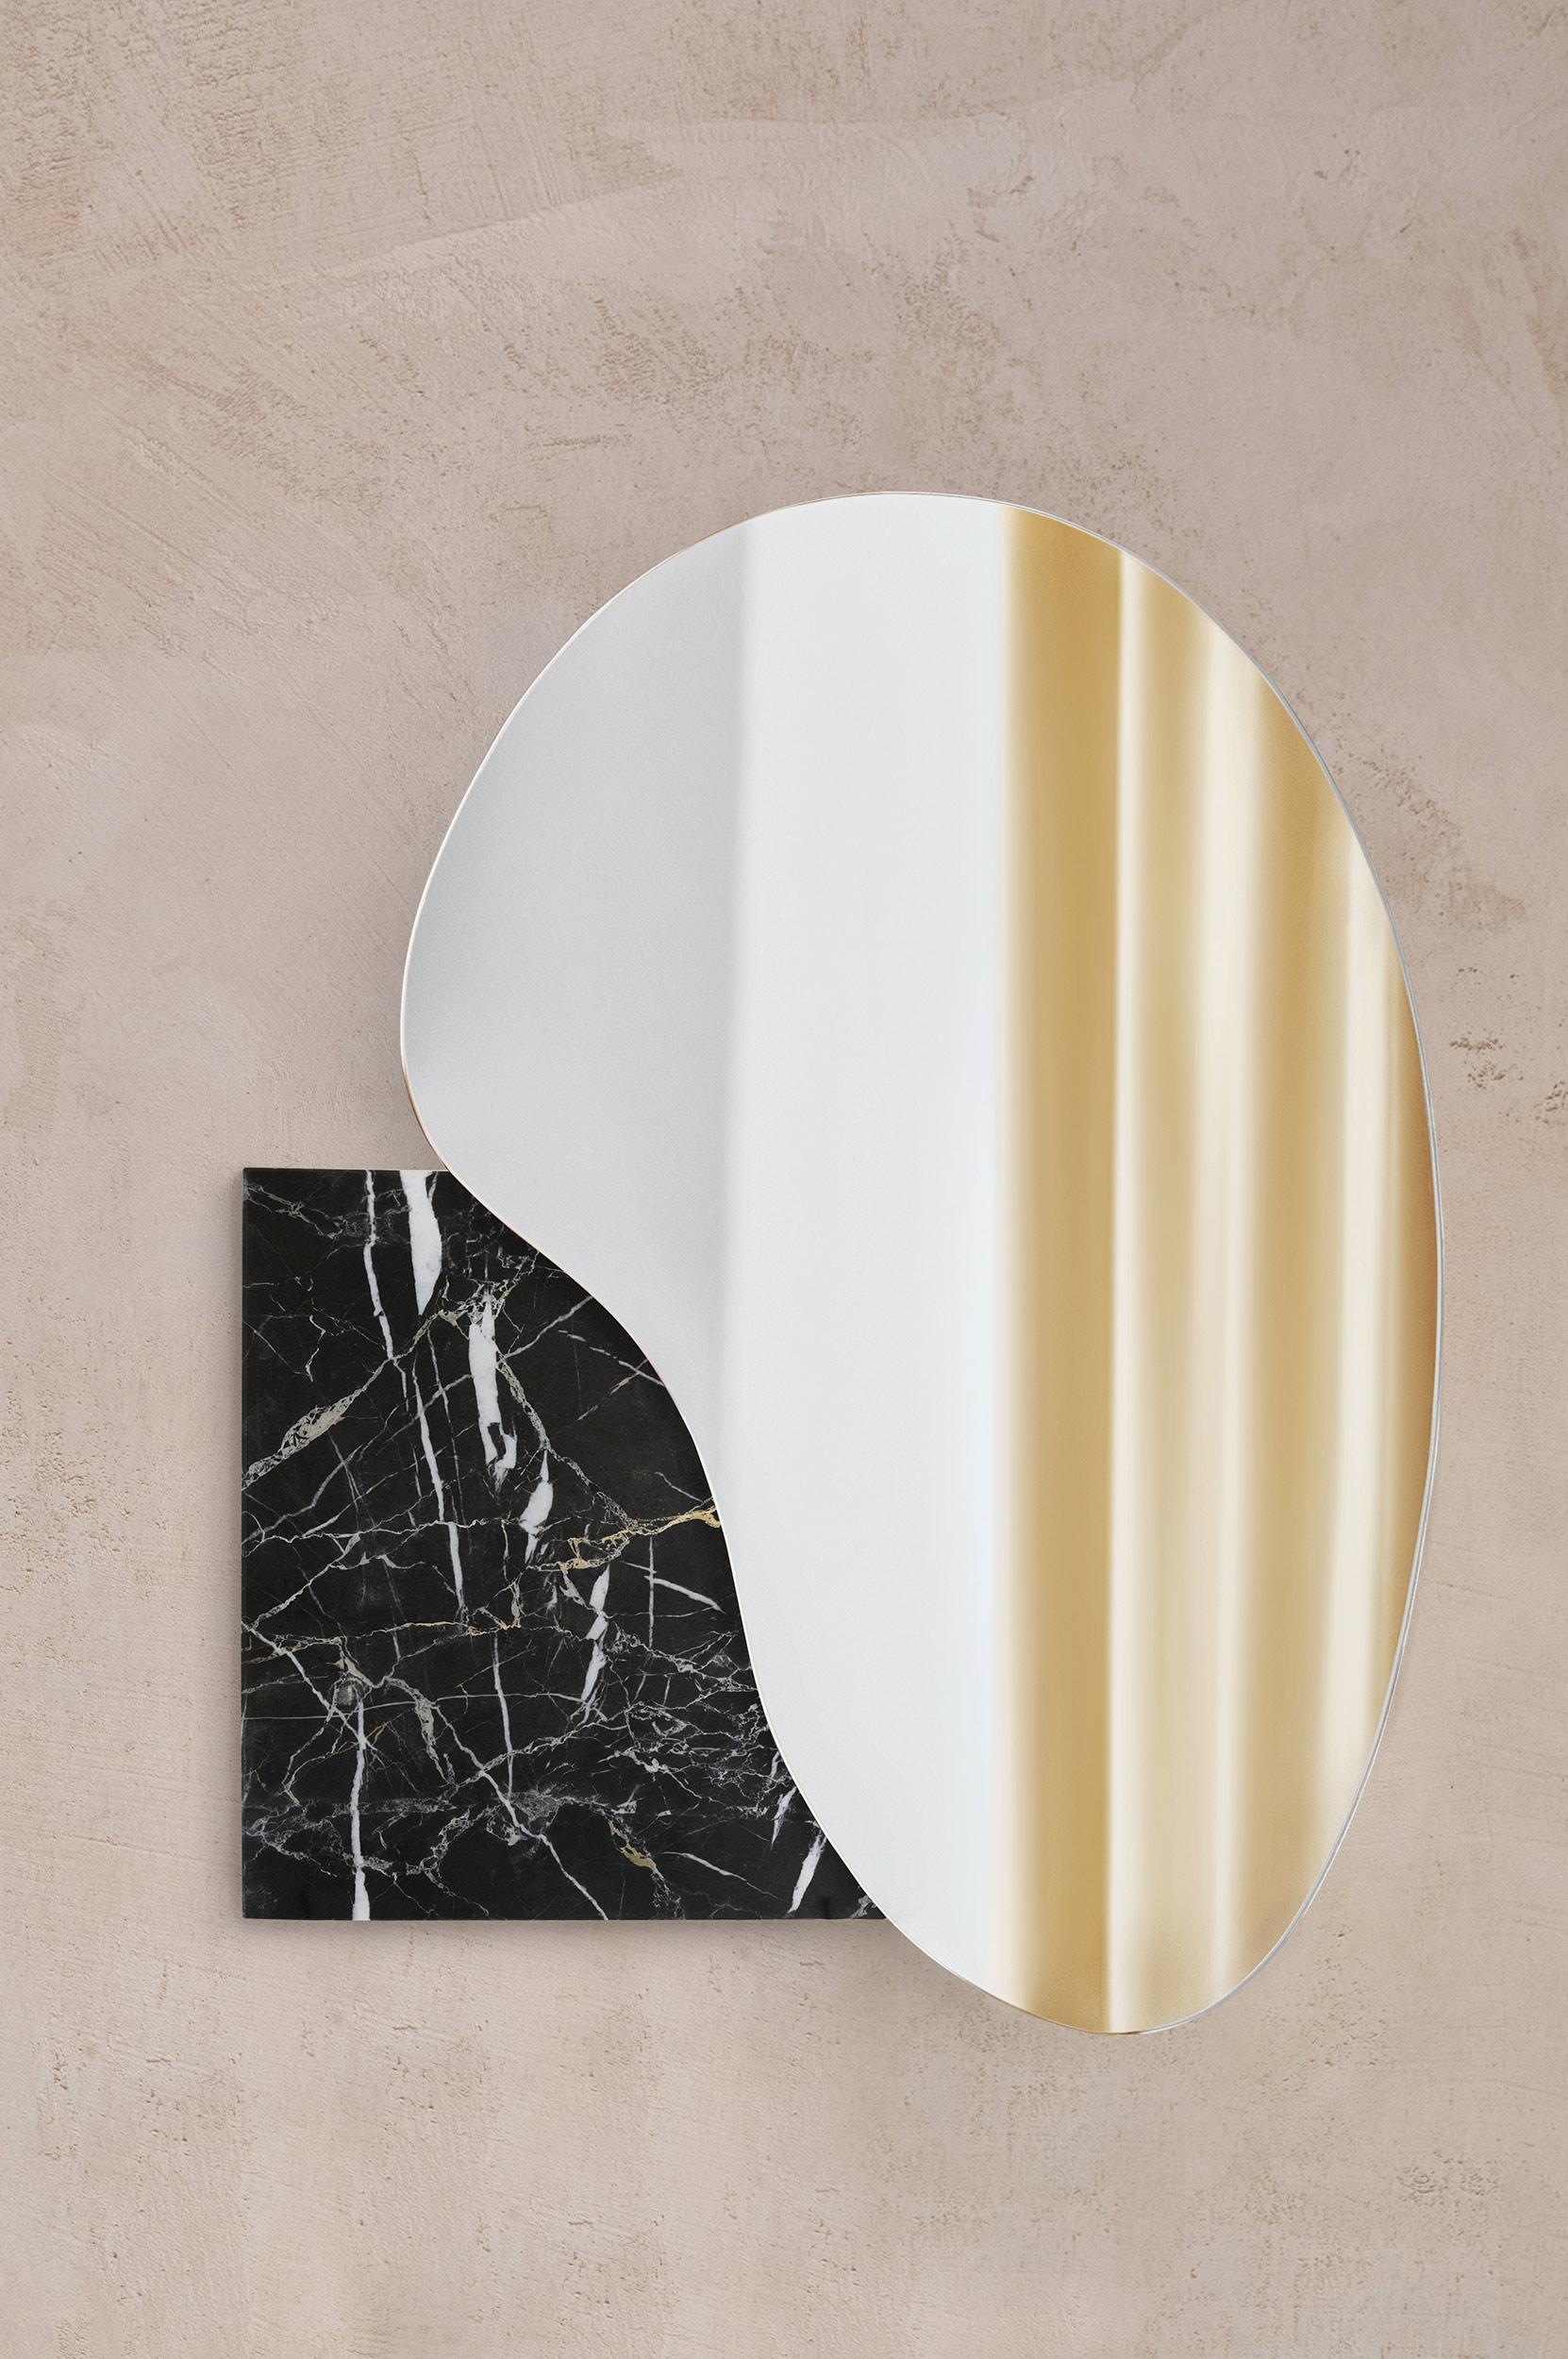 Modern lake wall mirror by Noom
Designers: Maryna Dague & Nathan Baraness

Model shown in picture:
Number 4
Base black marble alanya

